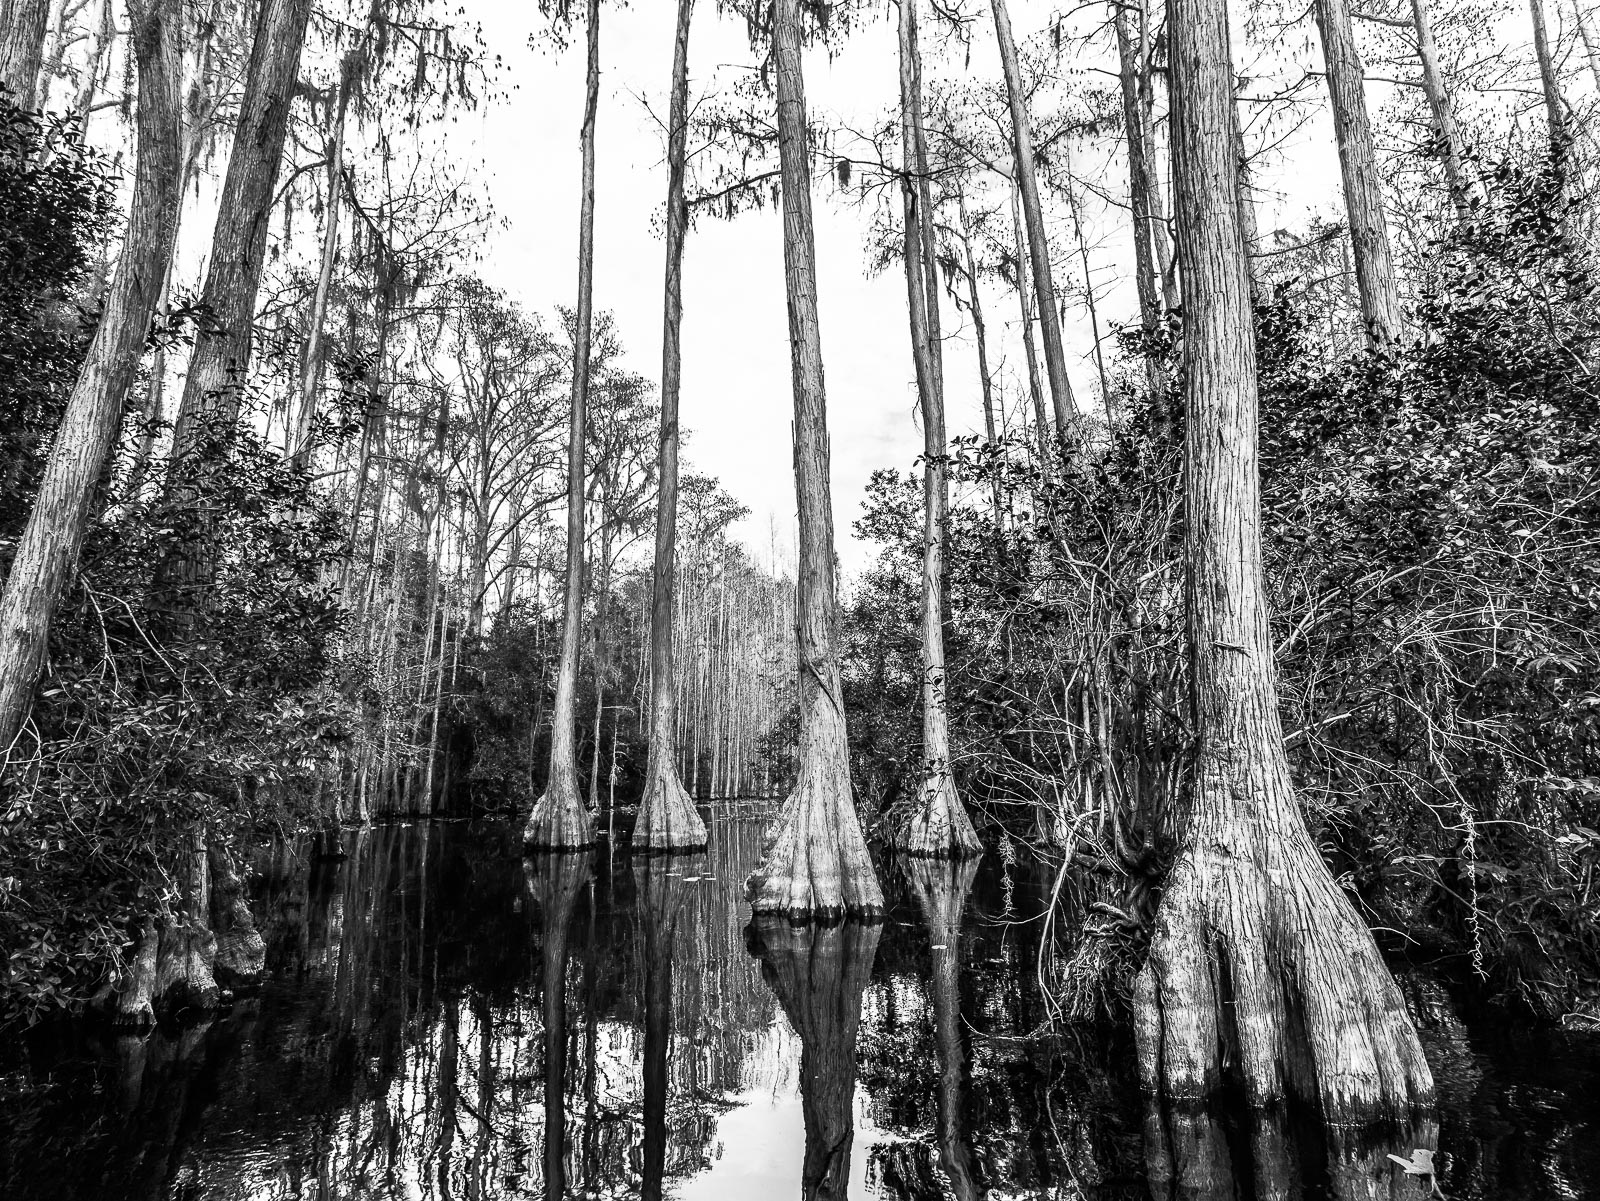 Hardly a person was around when I ventured out into the Okefenokee wildlife refuge during mid winter. What a treat! The unusual...